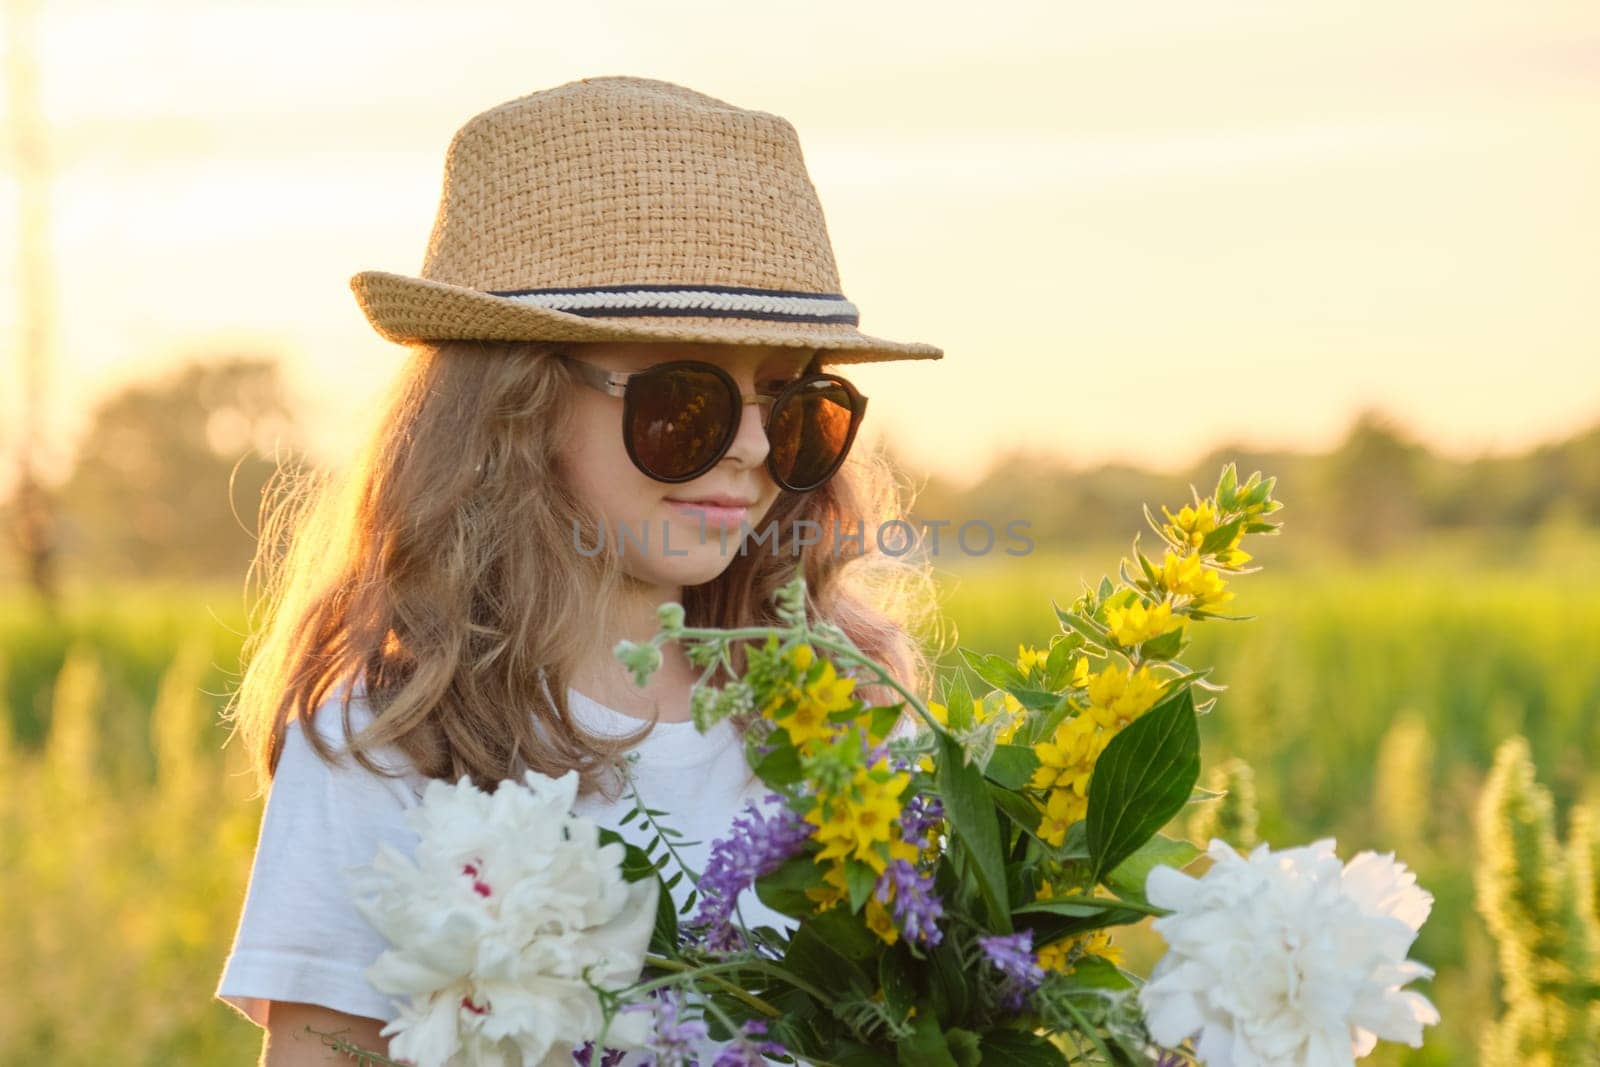 Sunny outdoor portrait of girl child 9, 10 years old in hat sunglasses with bouquet of flowers in meadow. Summer holidays, nature, childhood, beauty, golden hour